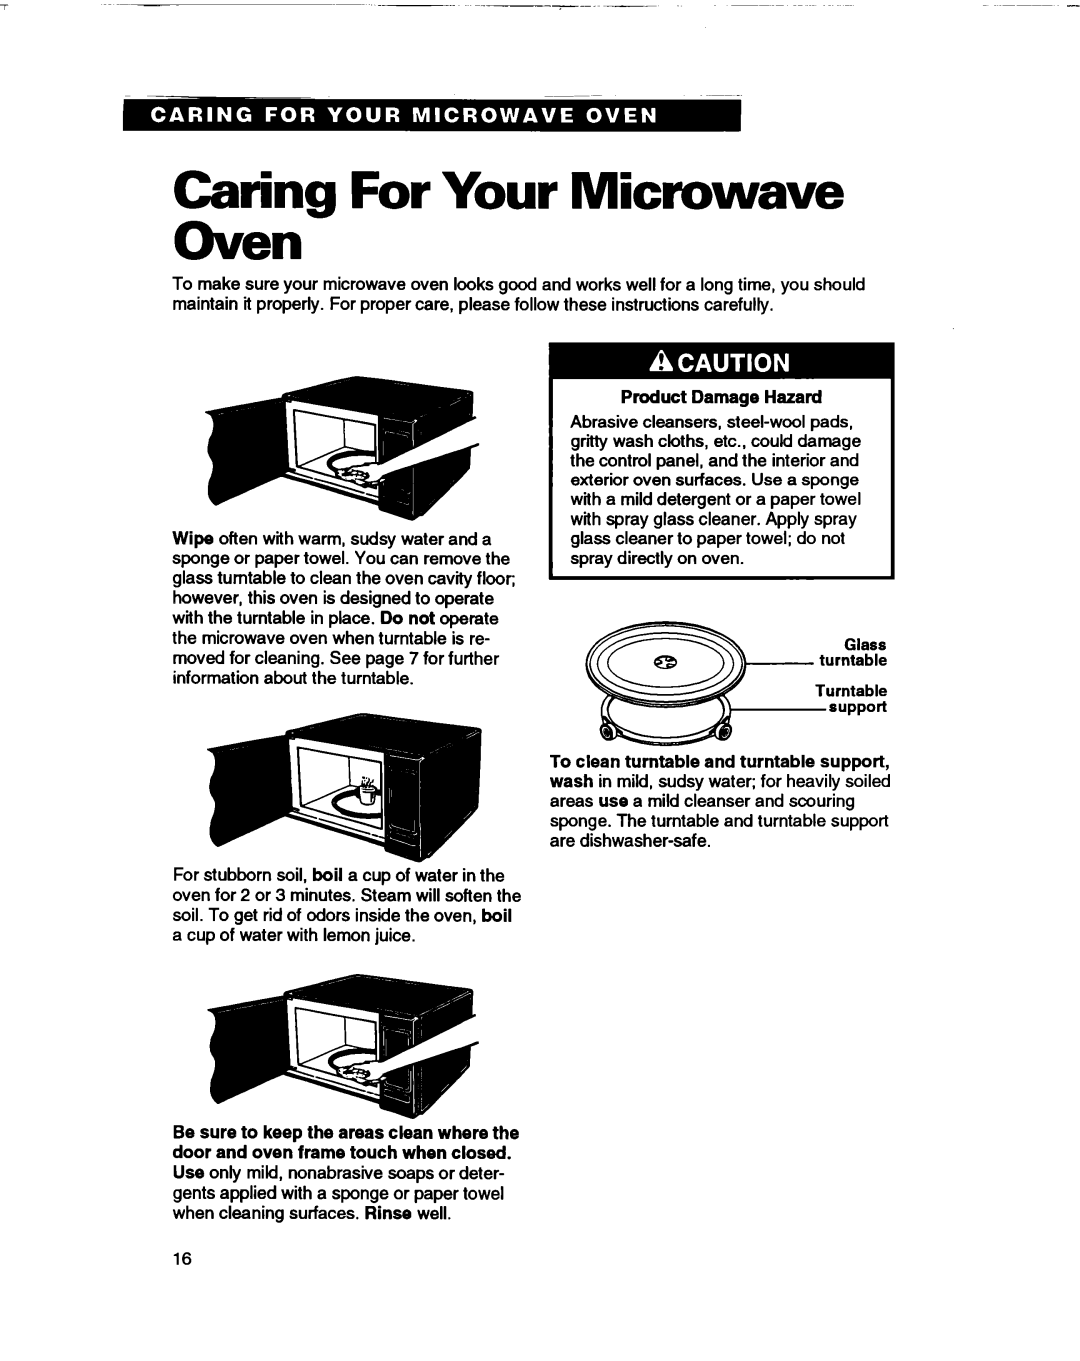 Whirlpool MT0060XB installation instructions Caring For Your Microwave Oven, Product Damage Hazard 